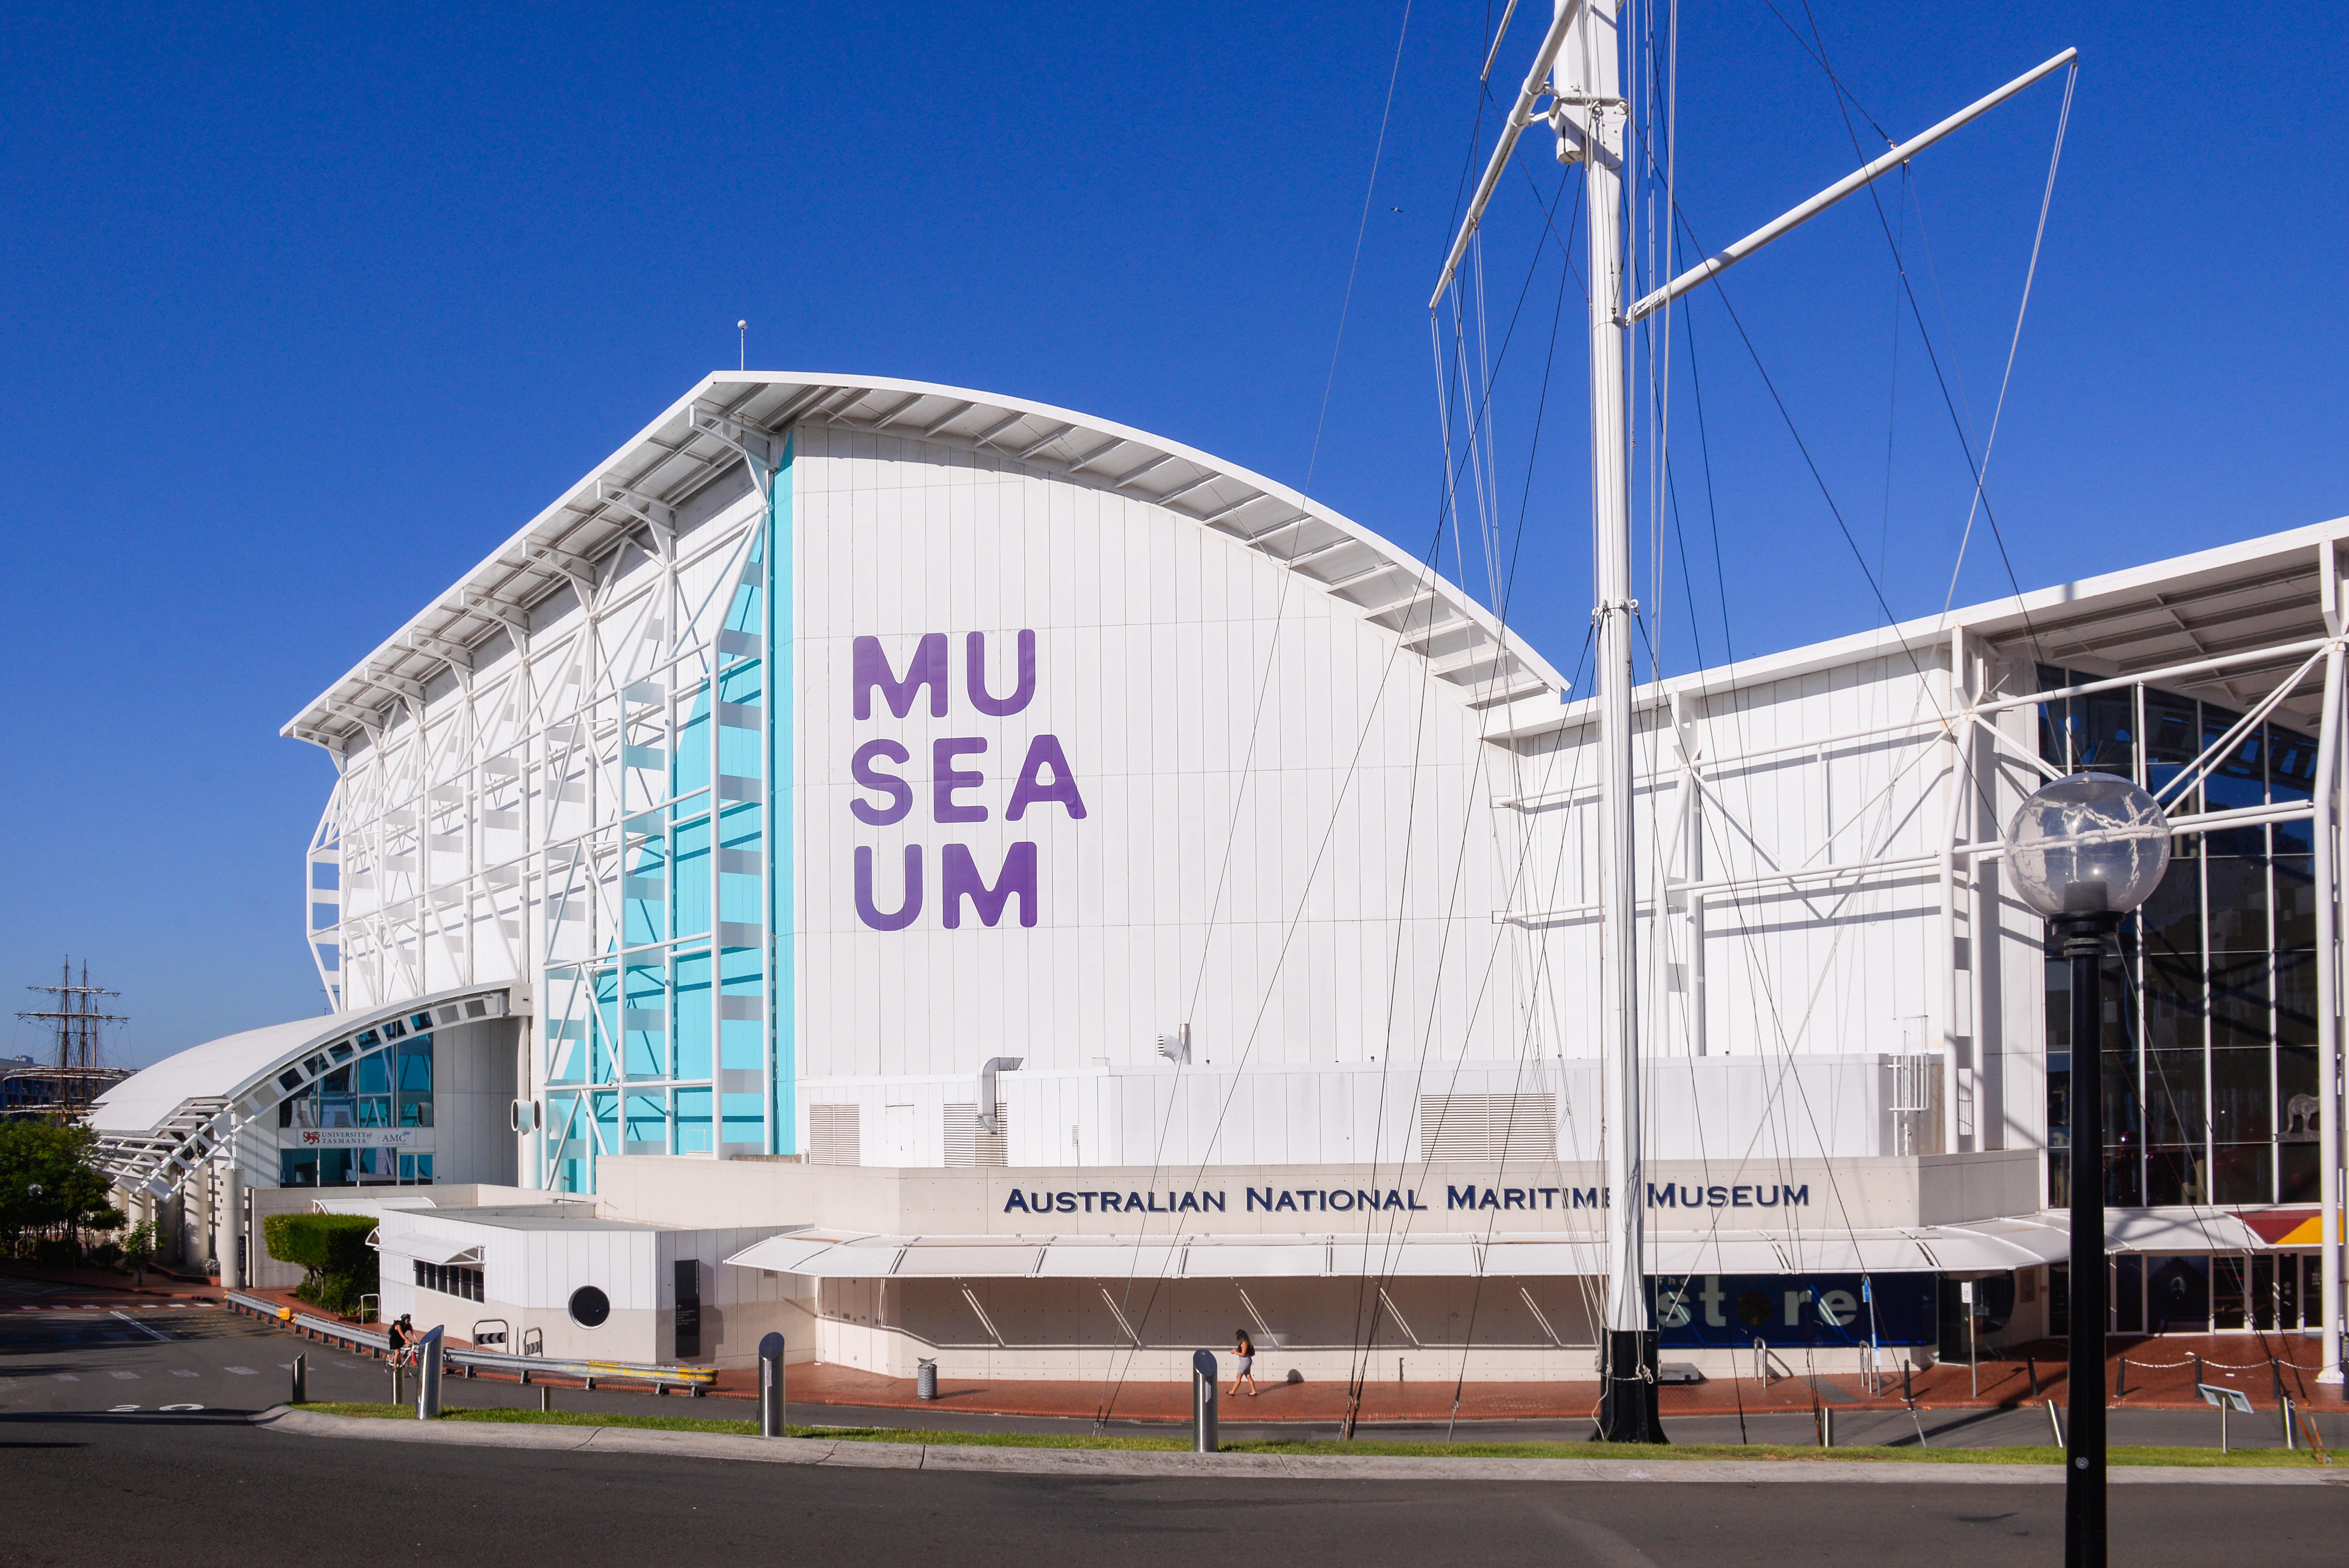 Welcome to the Australian National Maritime Museum!